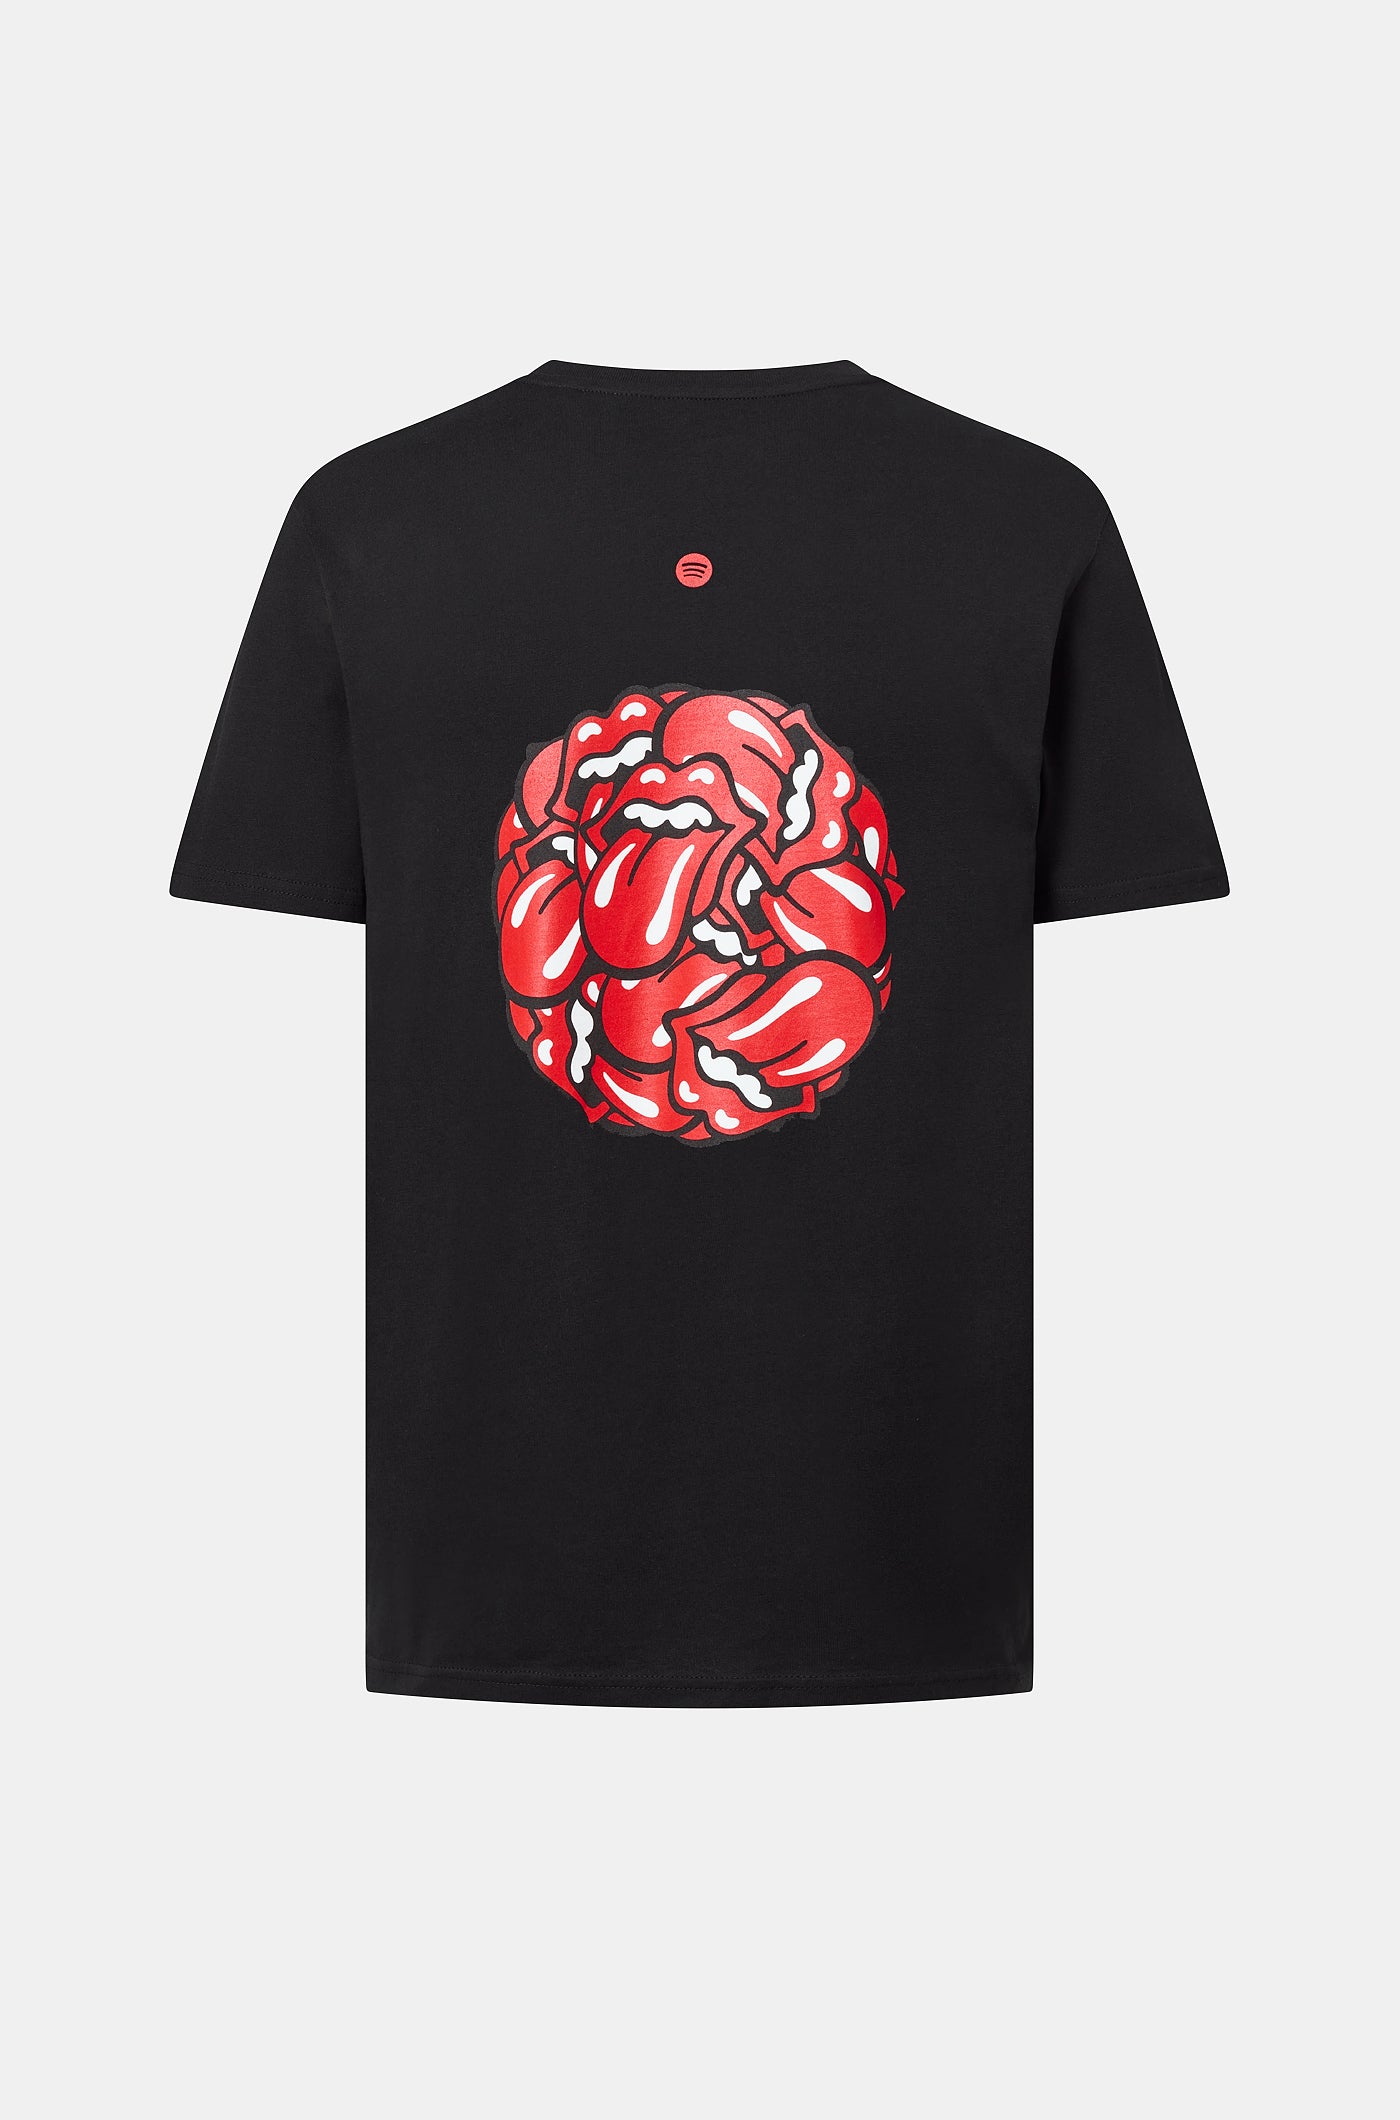 Barça x Rolling Stones limited edition t-shirt - Oversize